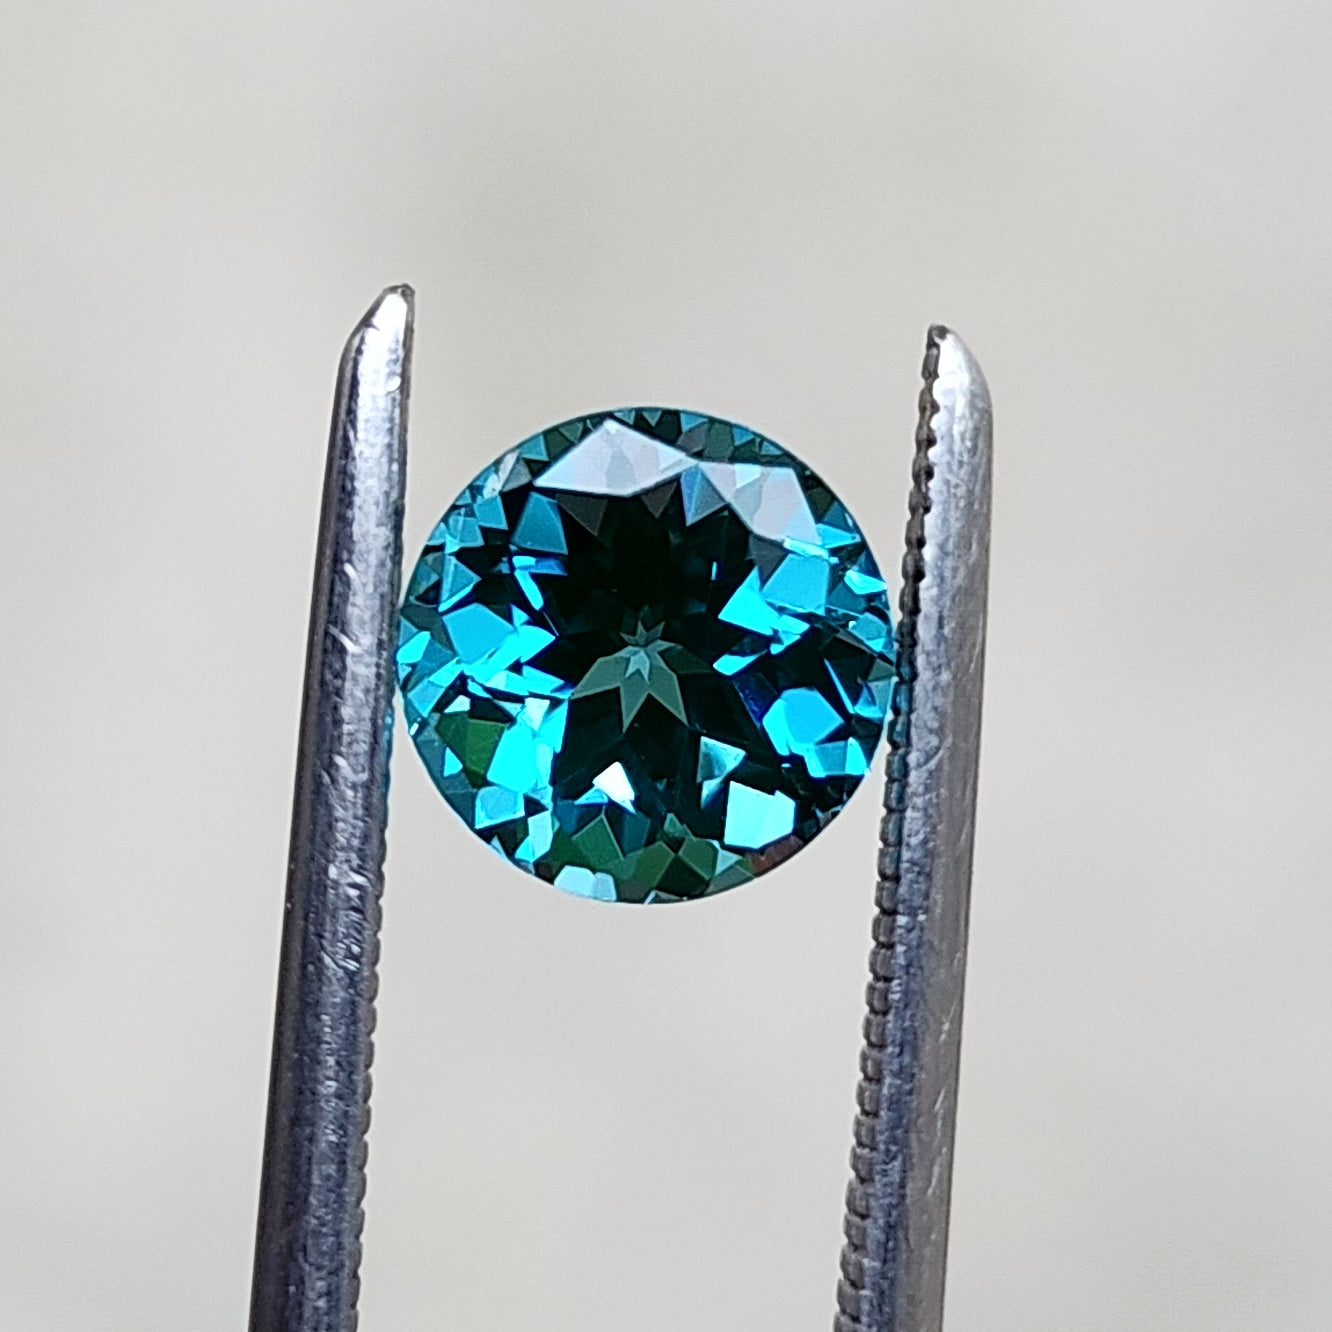 Round Cut Chatham Paraiba Spinel - For Build Your Own Pieces